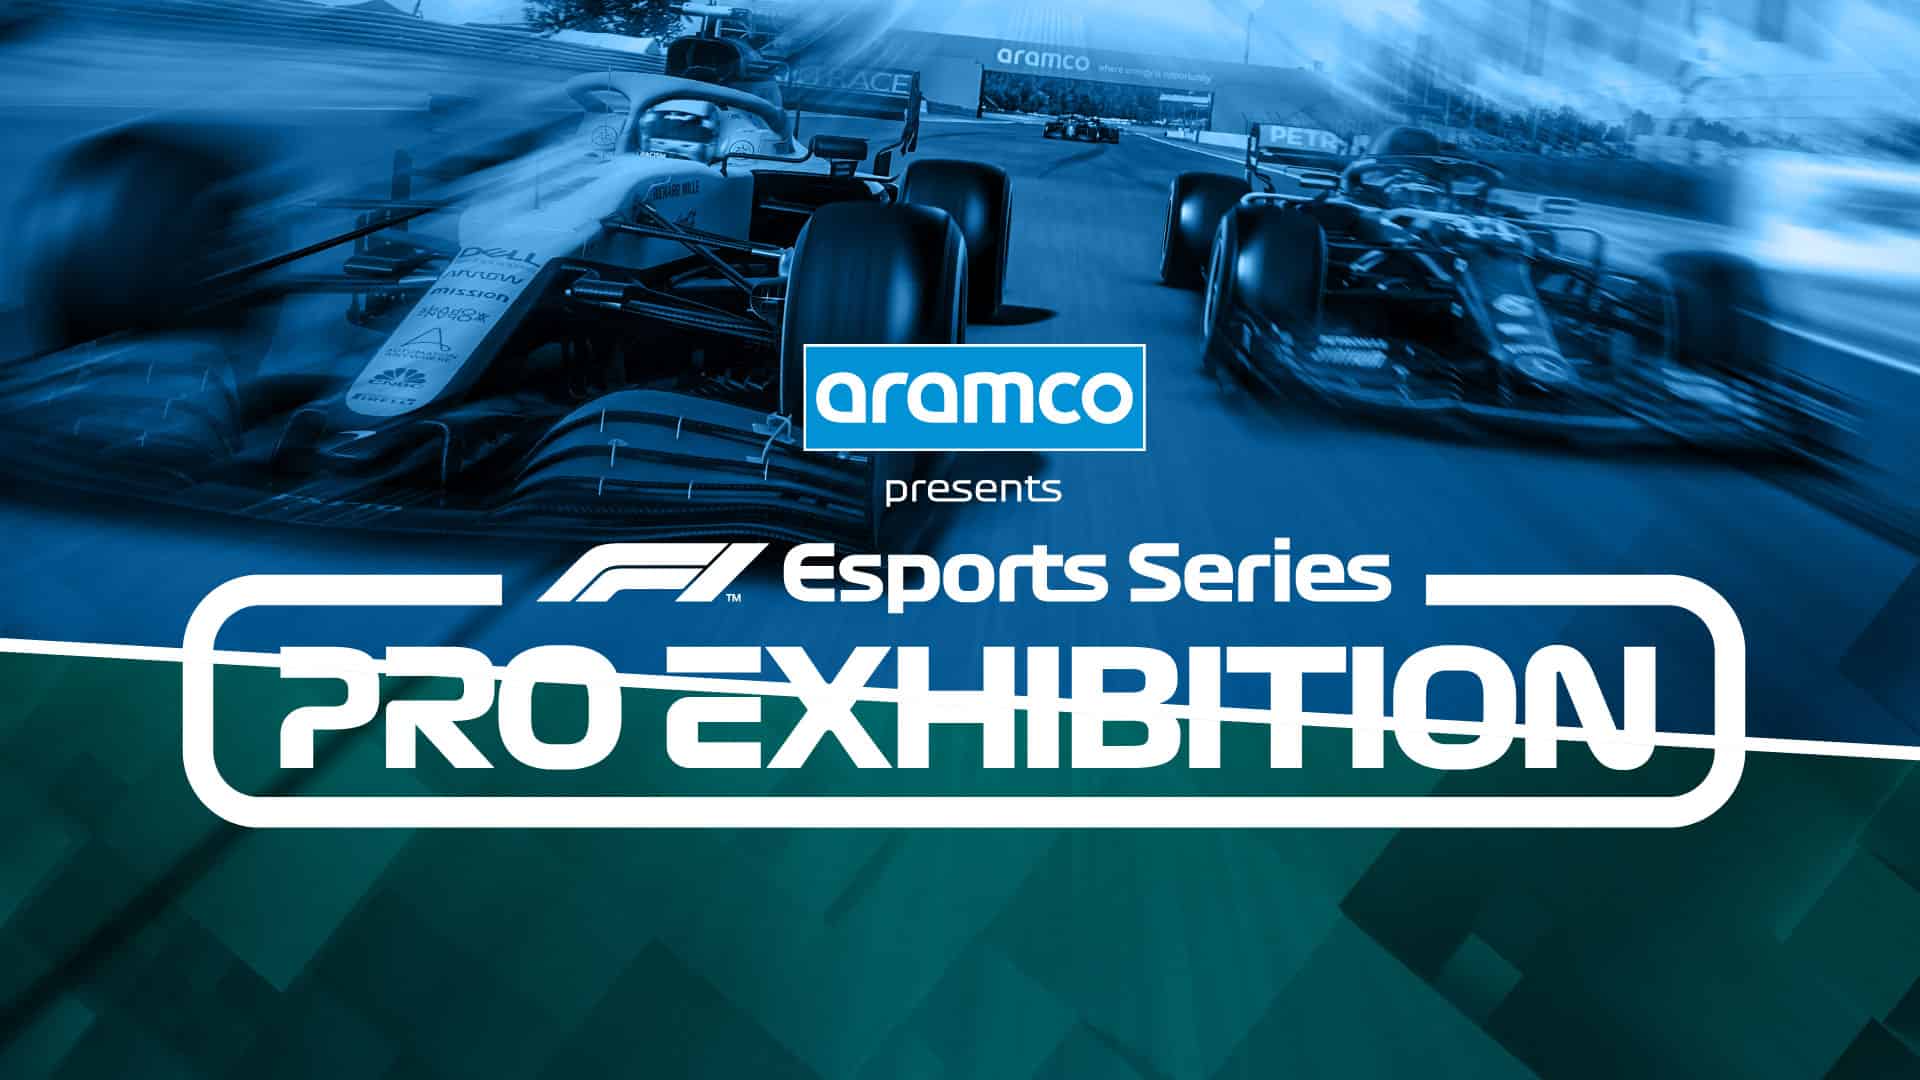 F1 Esports Pro Exhibition will showcase talent live this Thursday